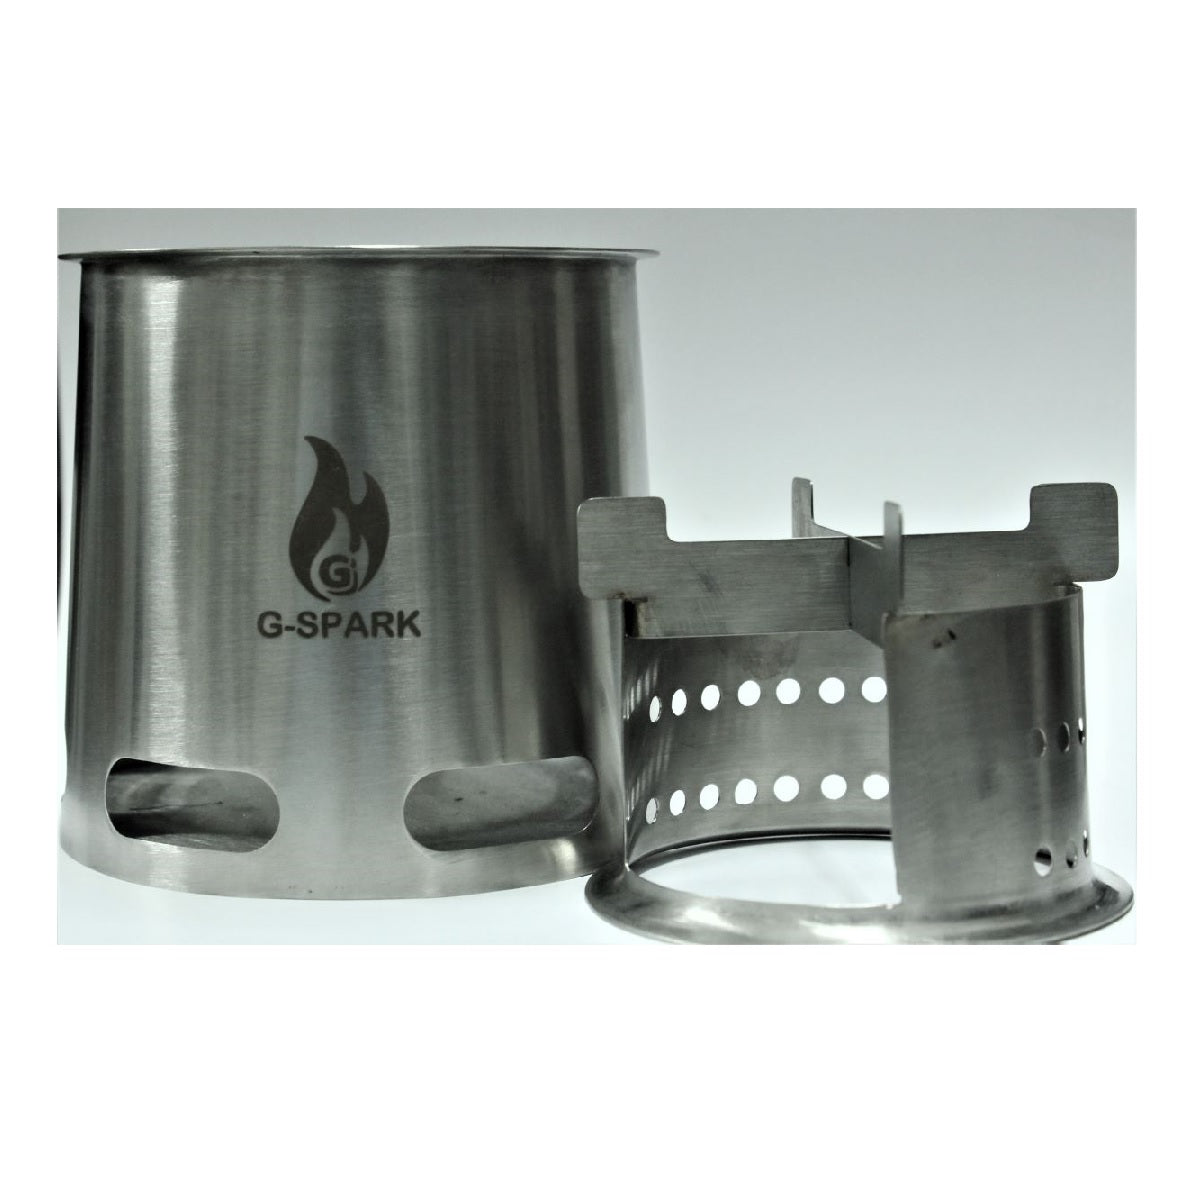 G-Spark Camping Stove - Outdoor Travel Gear 5